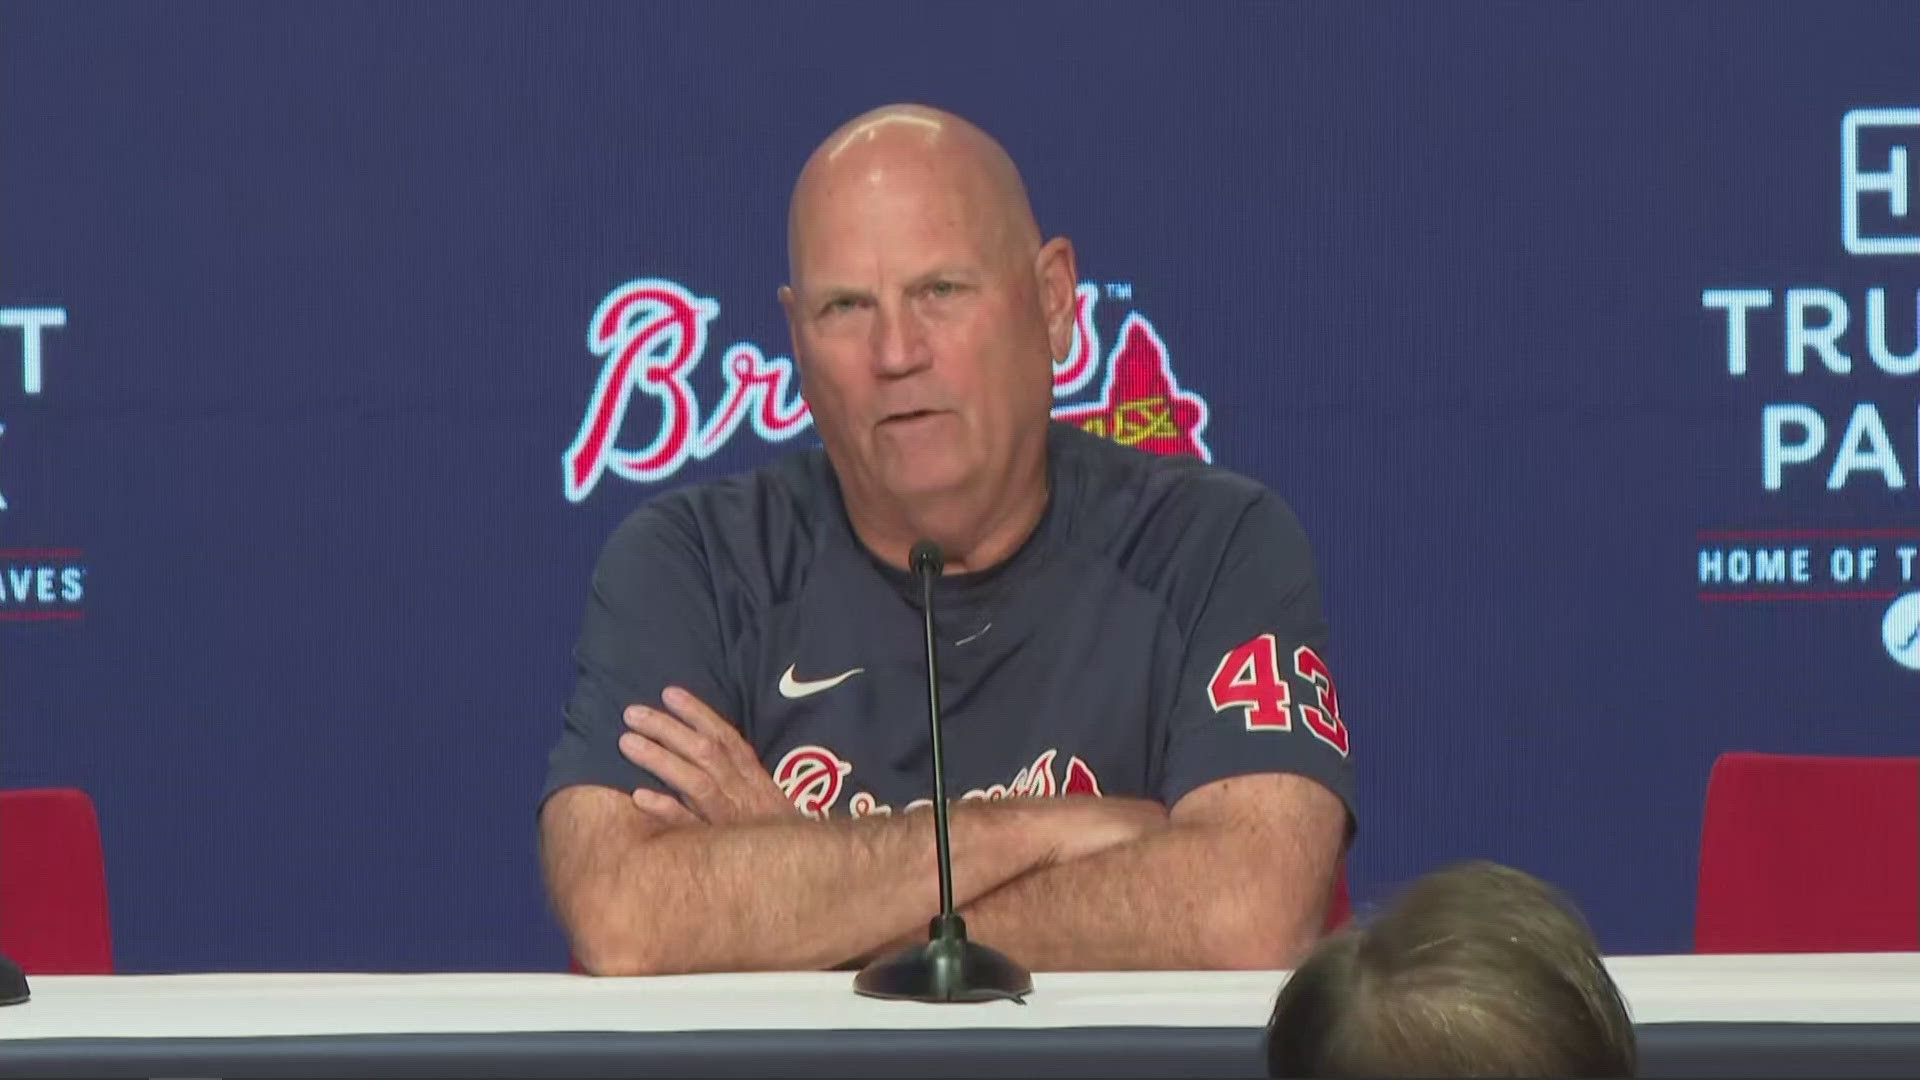 Braves head coach gives update on team